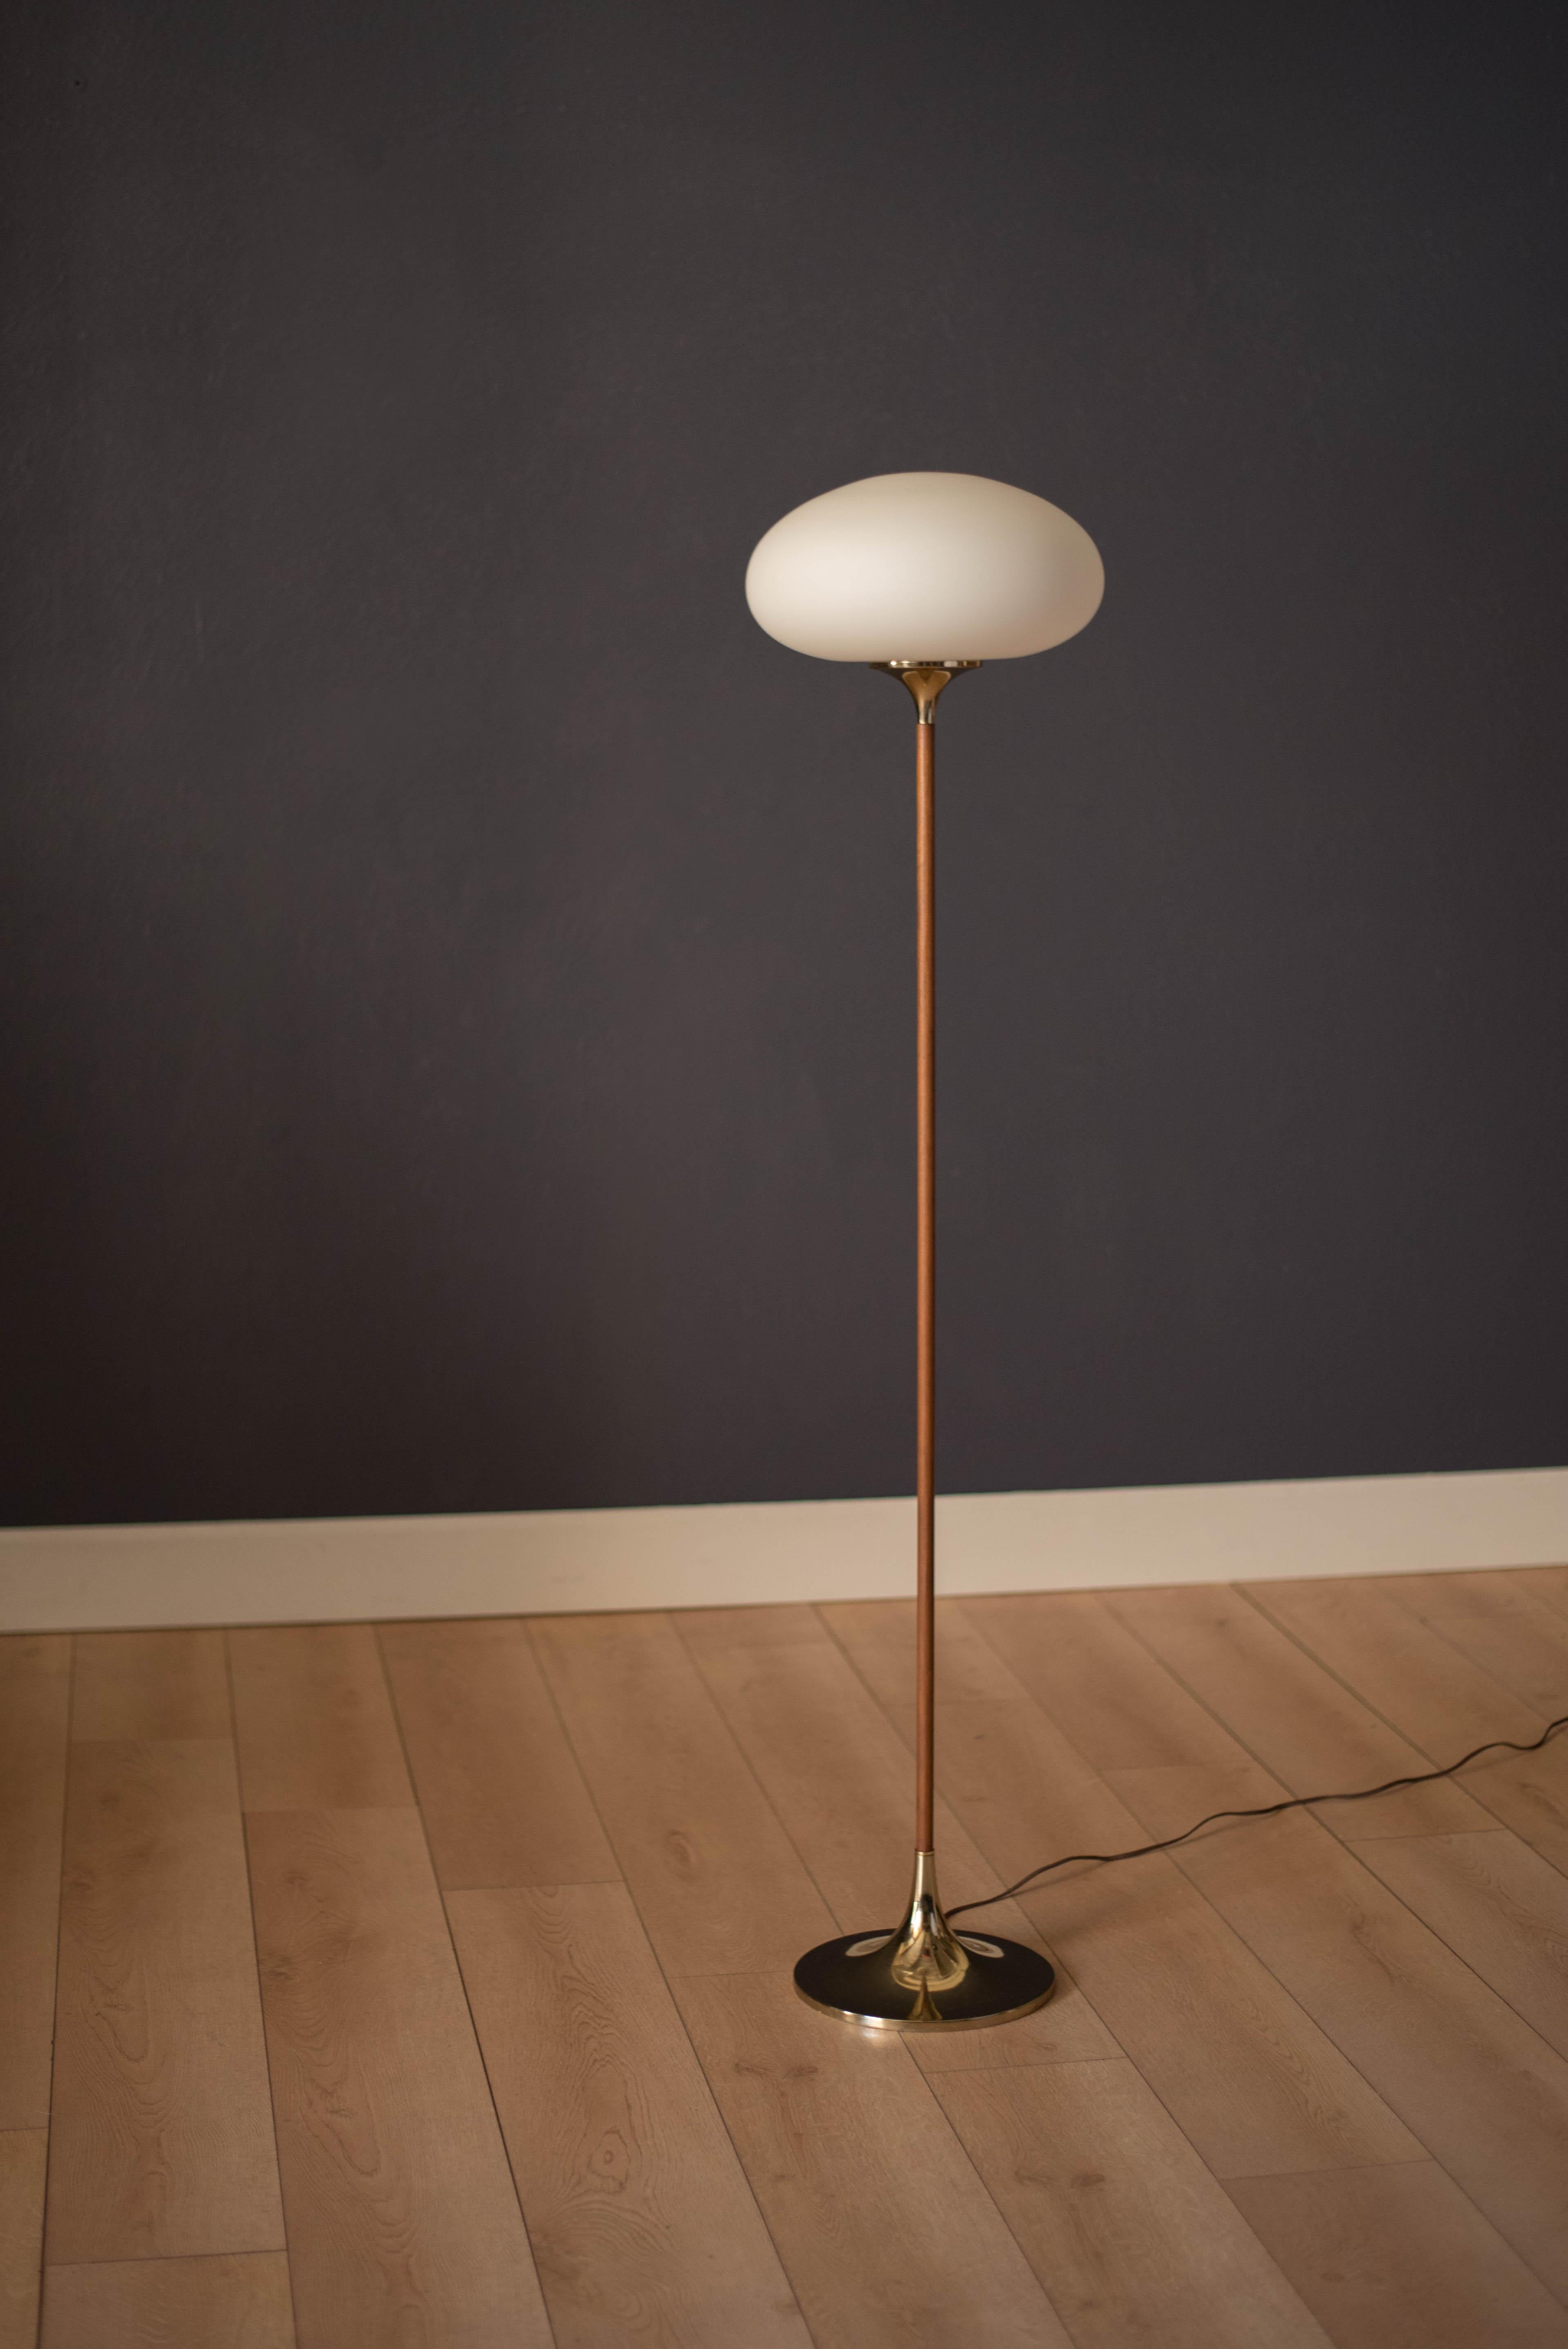 Mid-Century Modern floor lamp by Laurel Lamp Co. This piece emits light with a glowing mushroom frosted globe shade. Features a walnut stem and a sculptural brass base. Functions with a three-way switch.